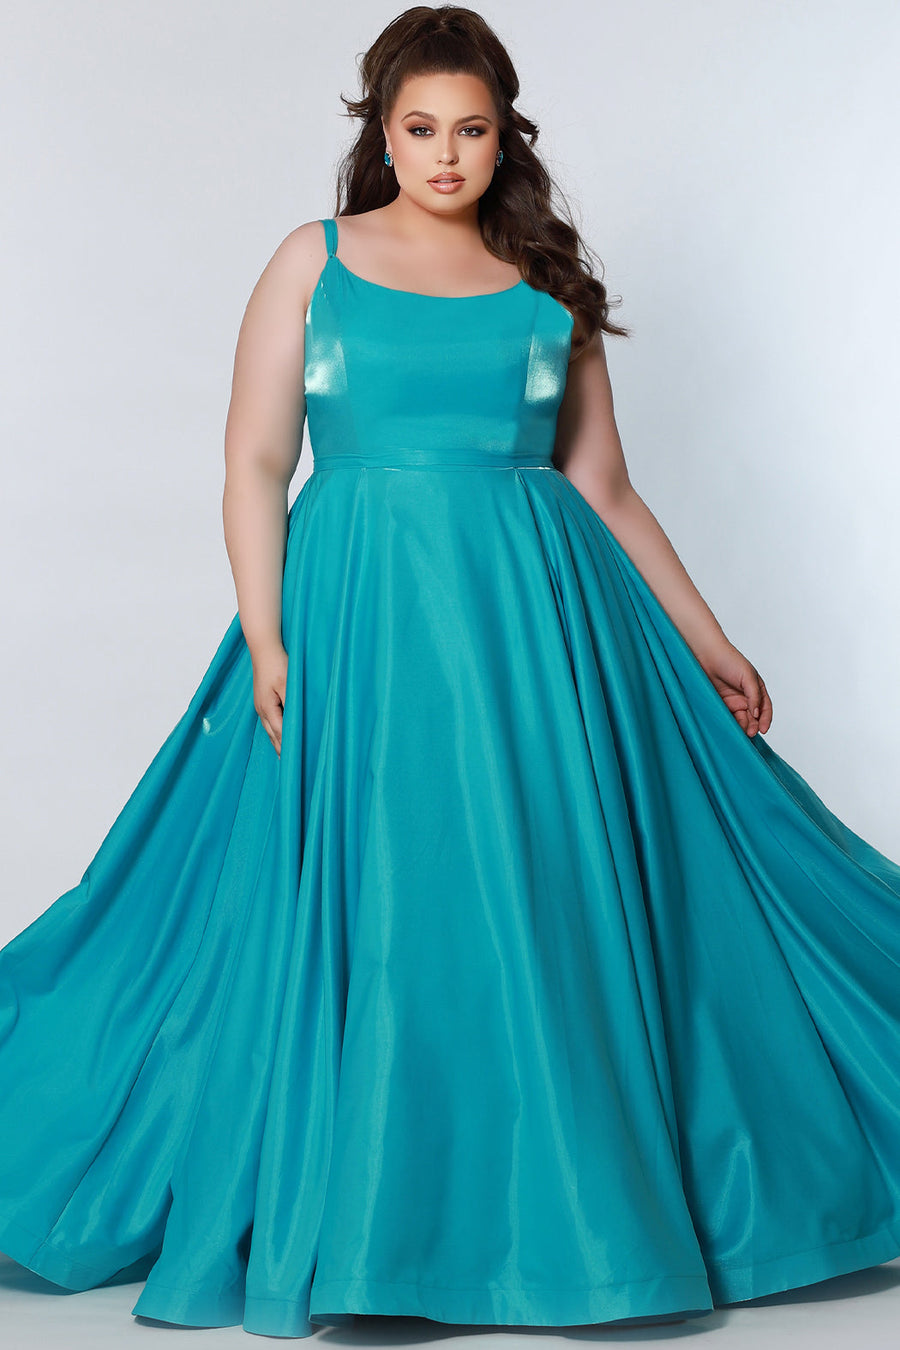 Tease Prom TE2226 Plus size a-line dress in aqua blue with spaghetti straps and pockets. 